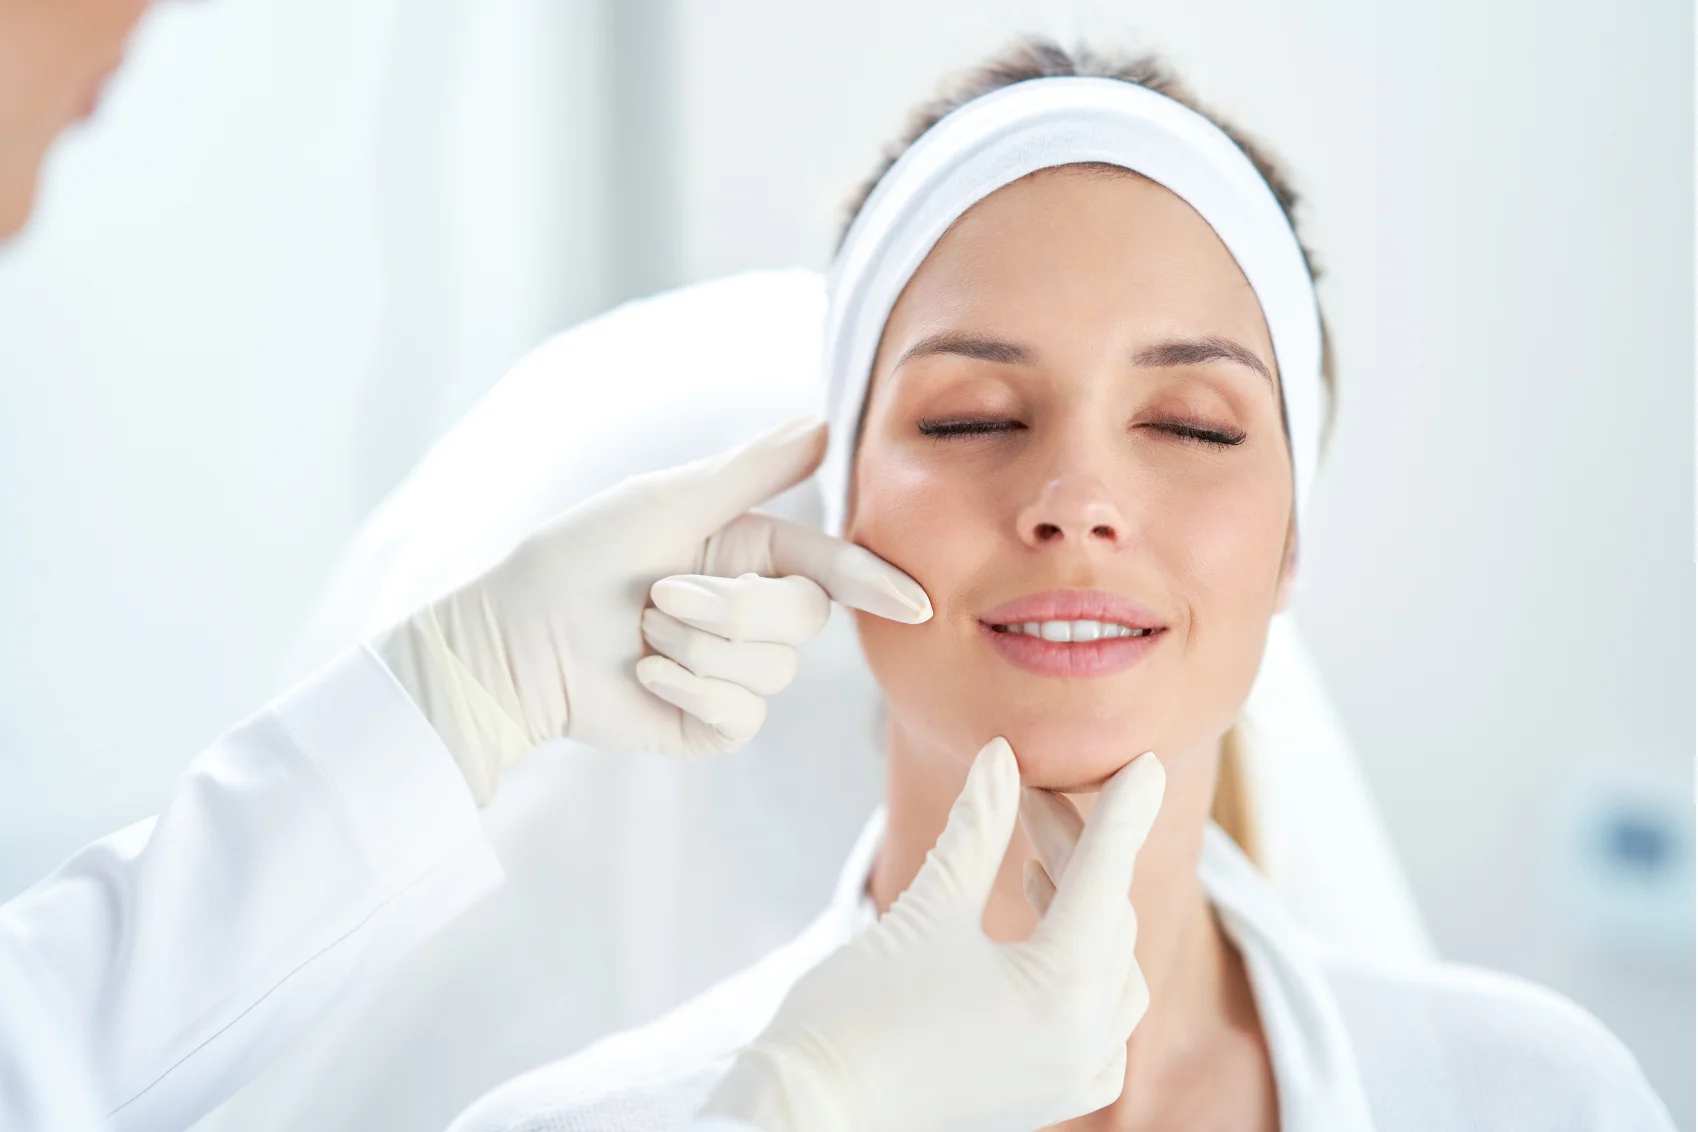 How Does The Botox® Treatment Work